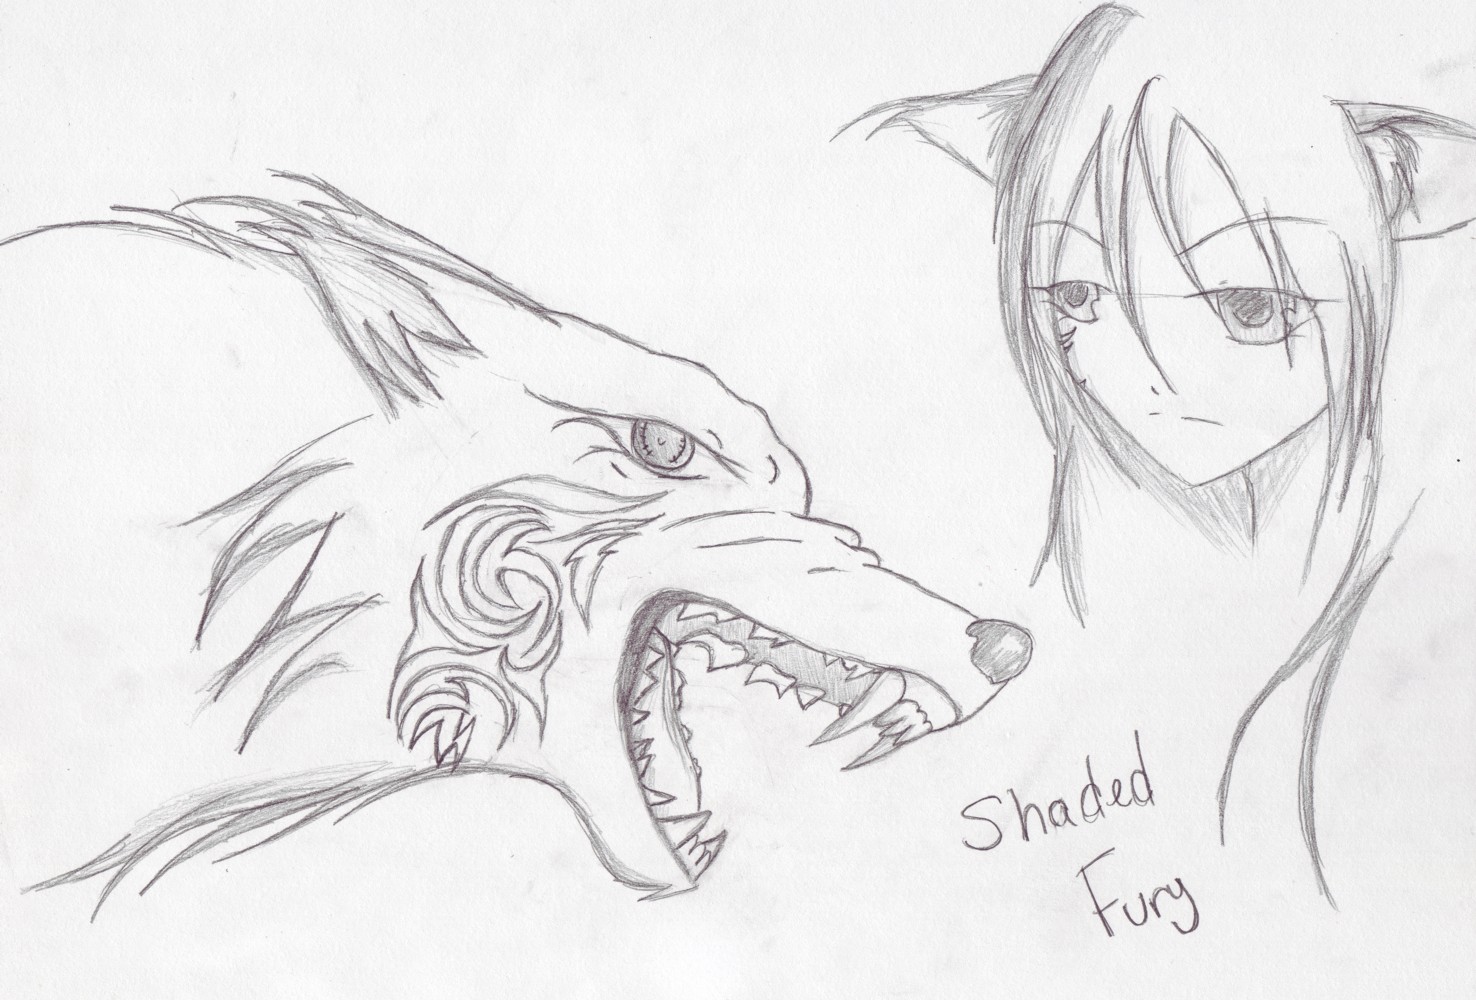 Shaded Fury by wolf_gang